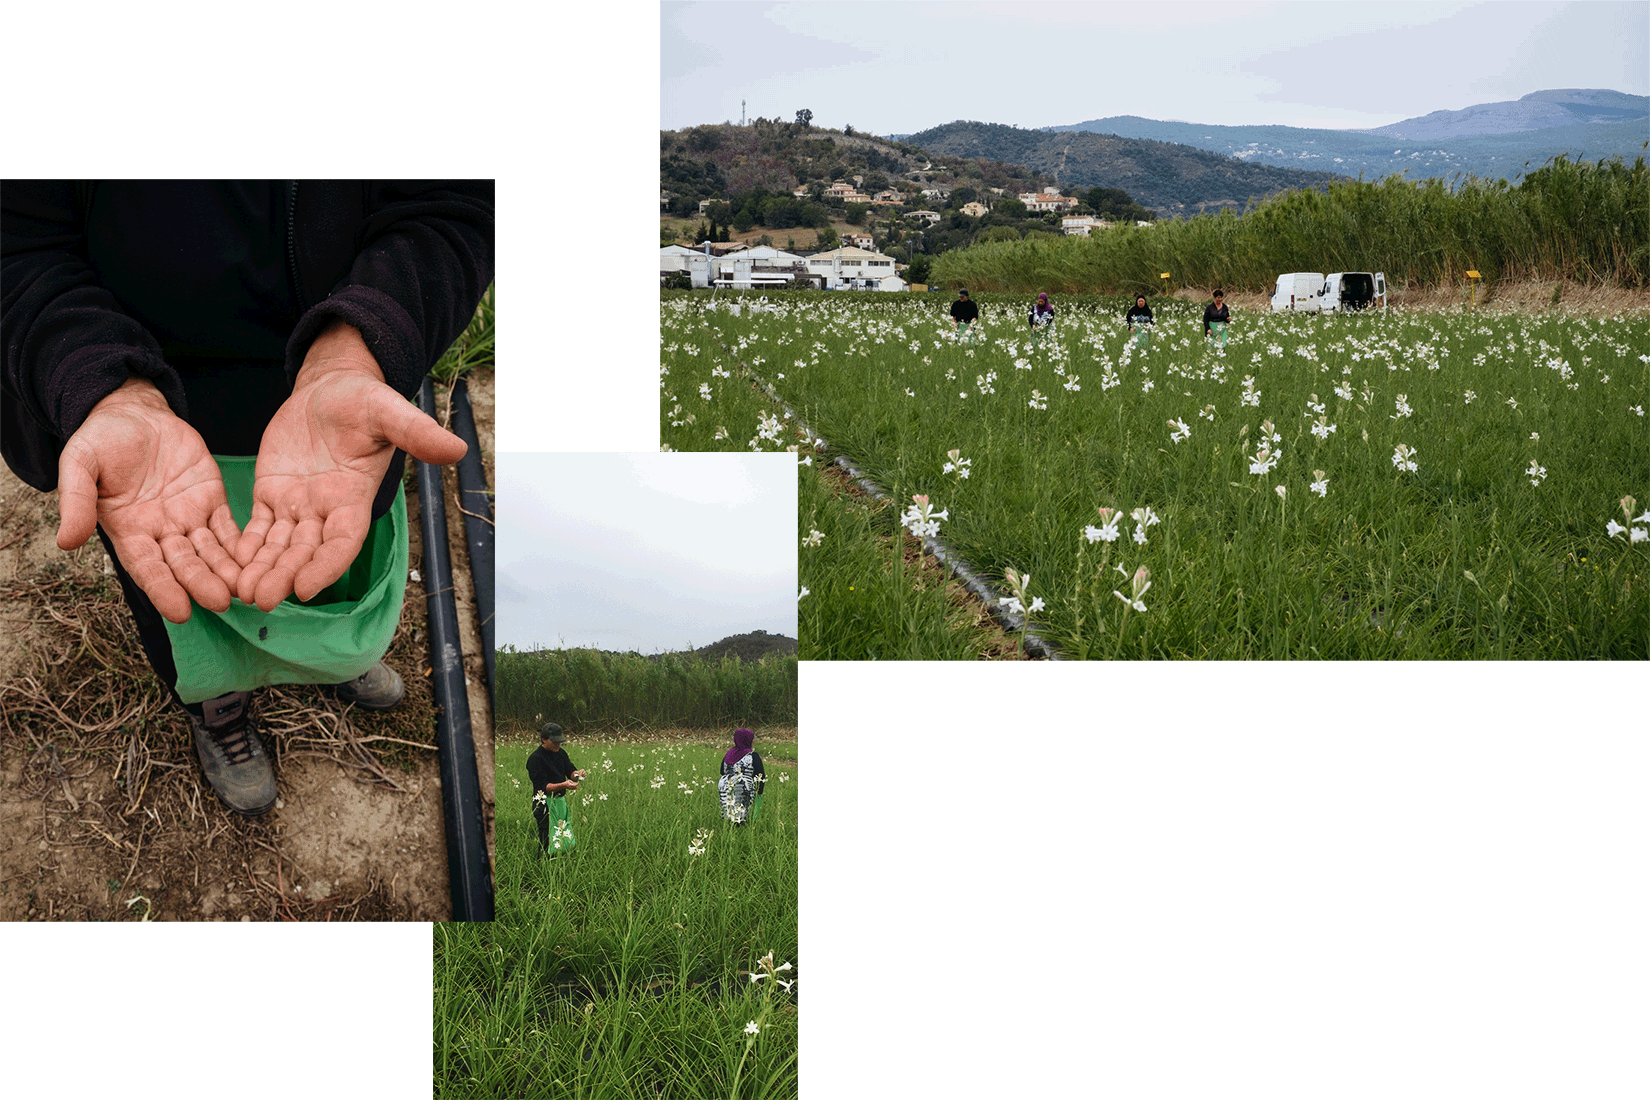 How the Tuberose flower gets plucked and harvested from its stem. Grasse, France.